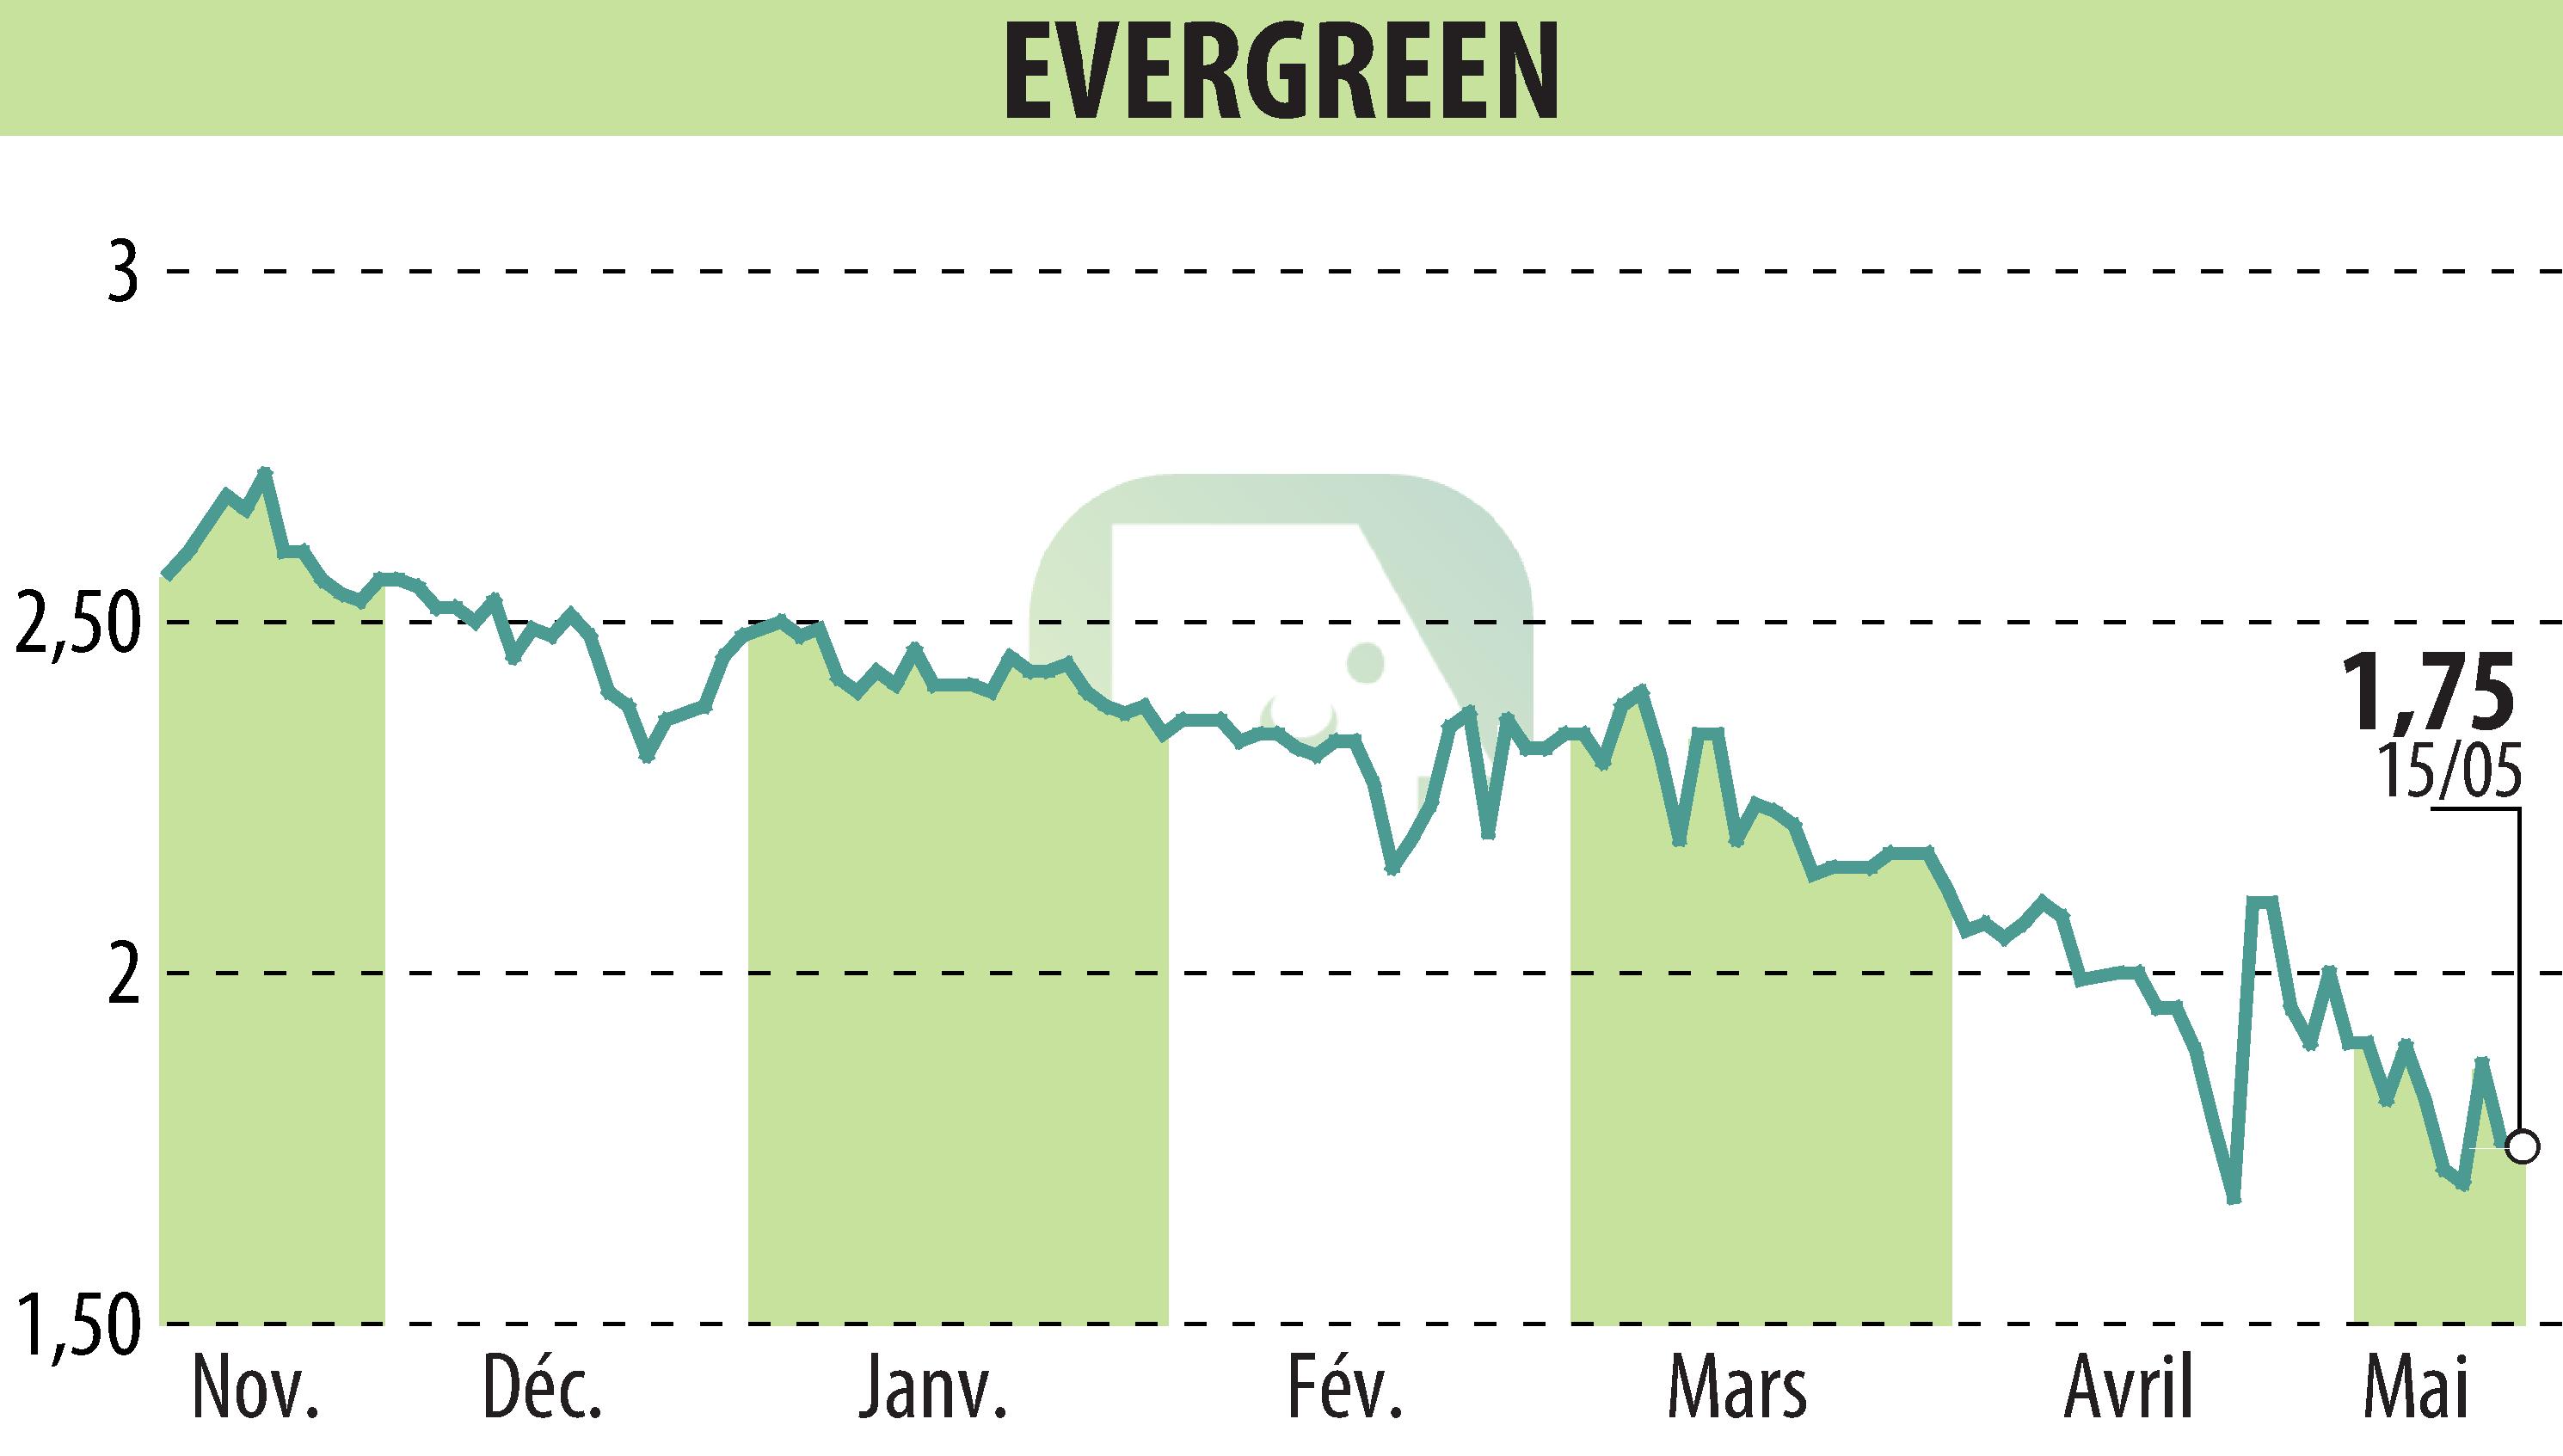 Stock price chart of EVERGREEN (EPA:EGR) showing fluctuations.